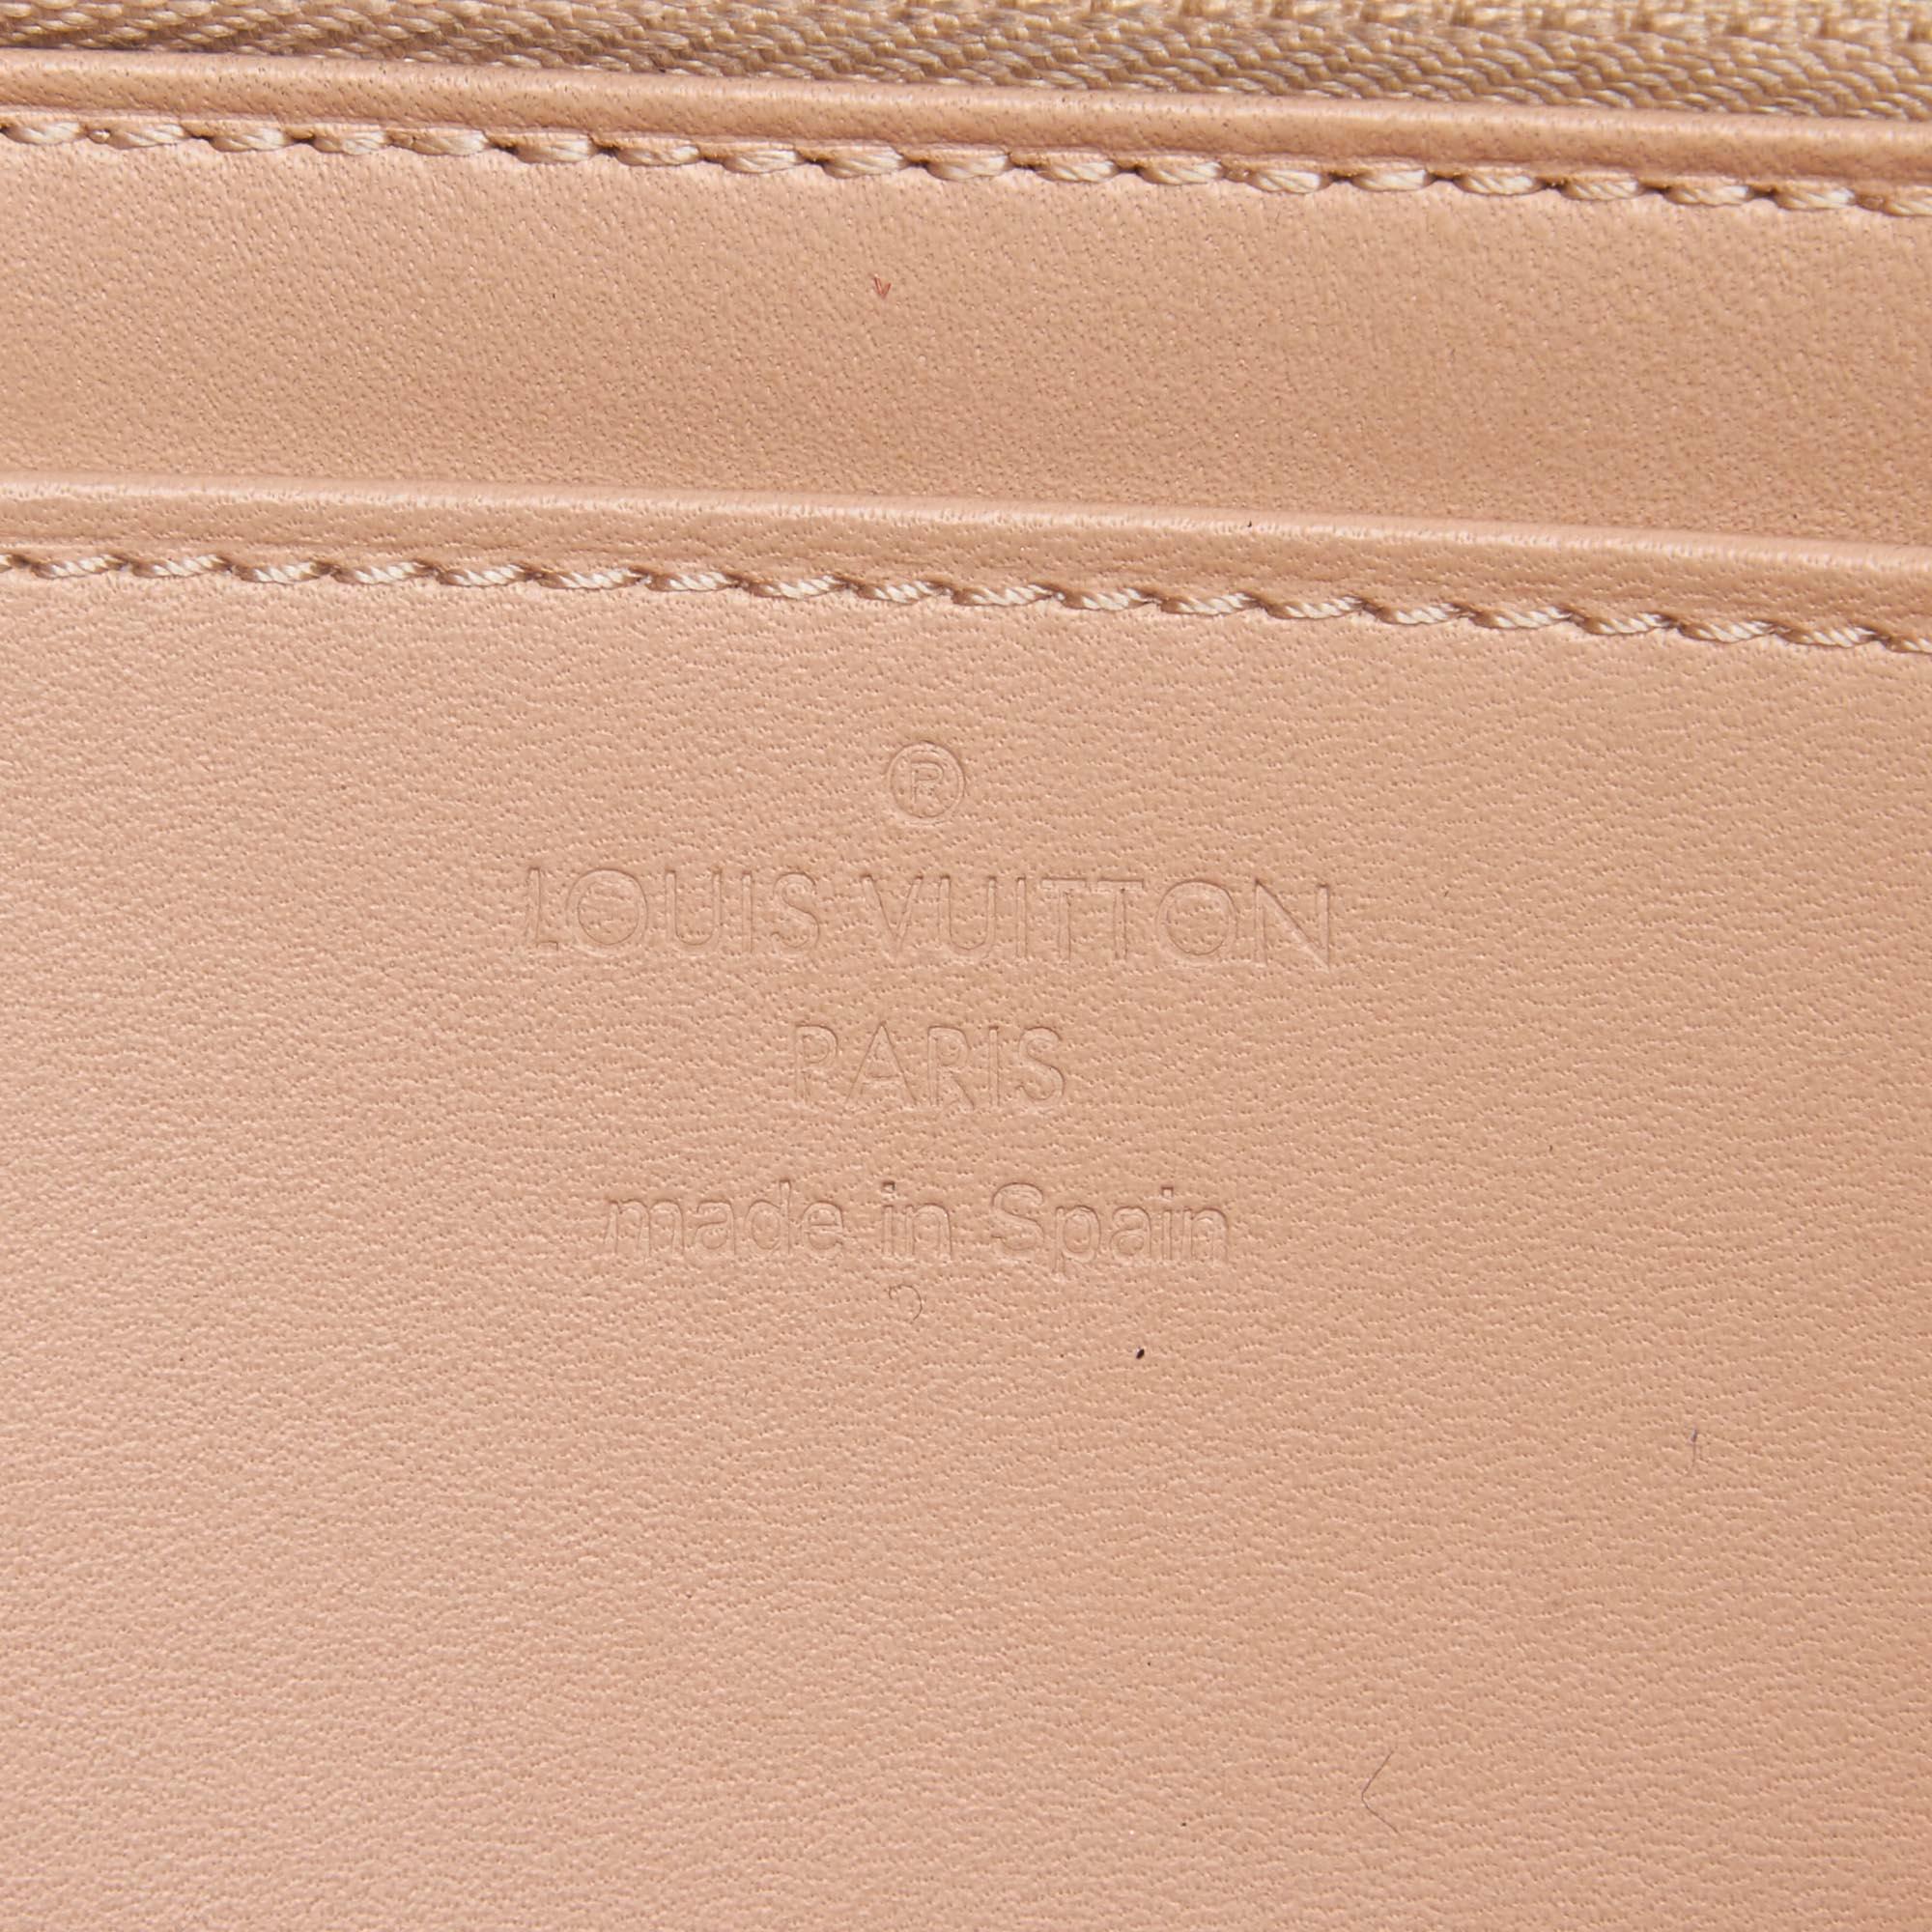 Vintage Authentic Louis Vuitton Vernis Louise Wallet France w Dust Bag SMALL  In Good Condition For Sale In Orlando, FL